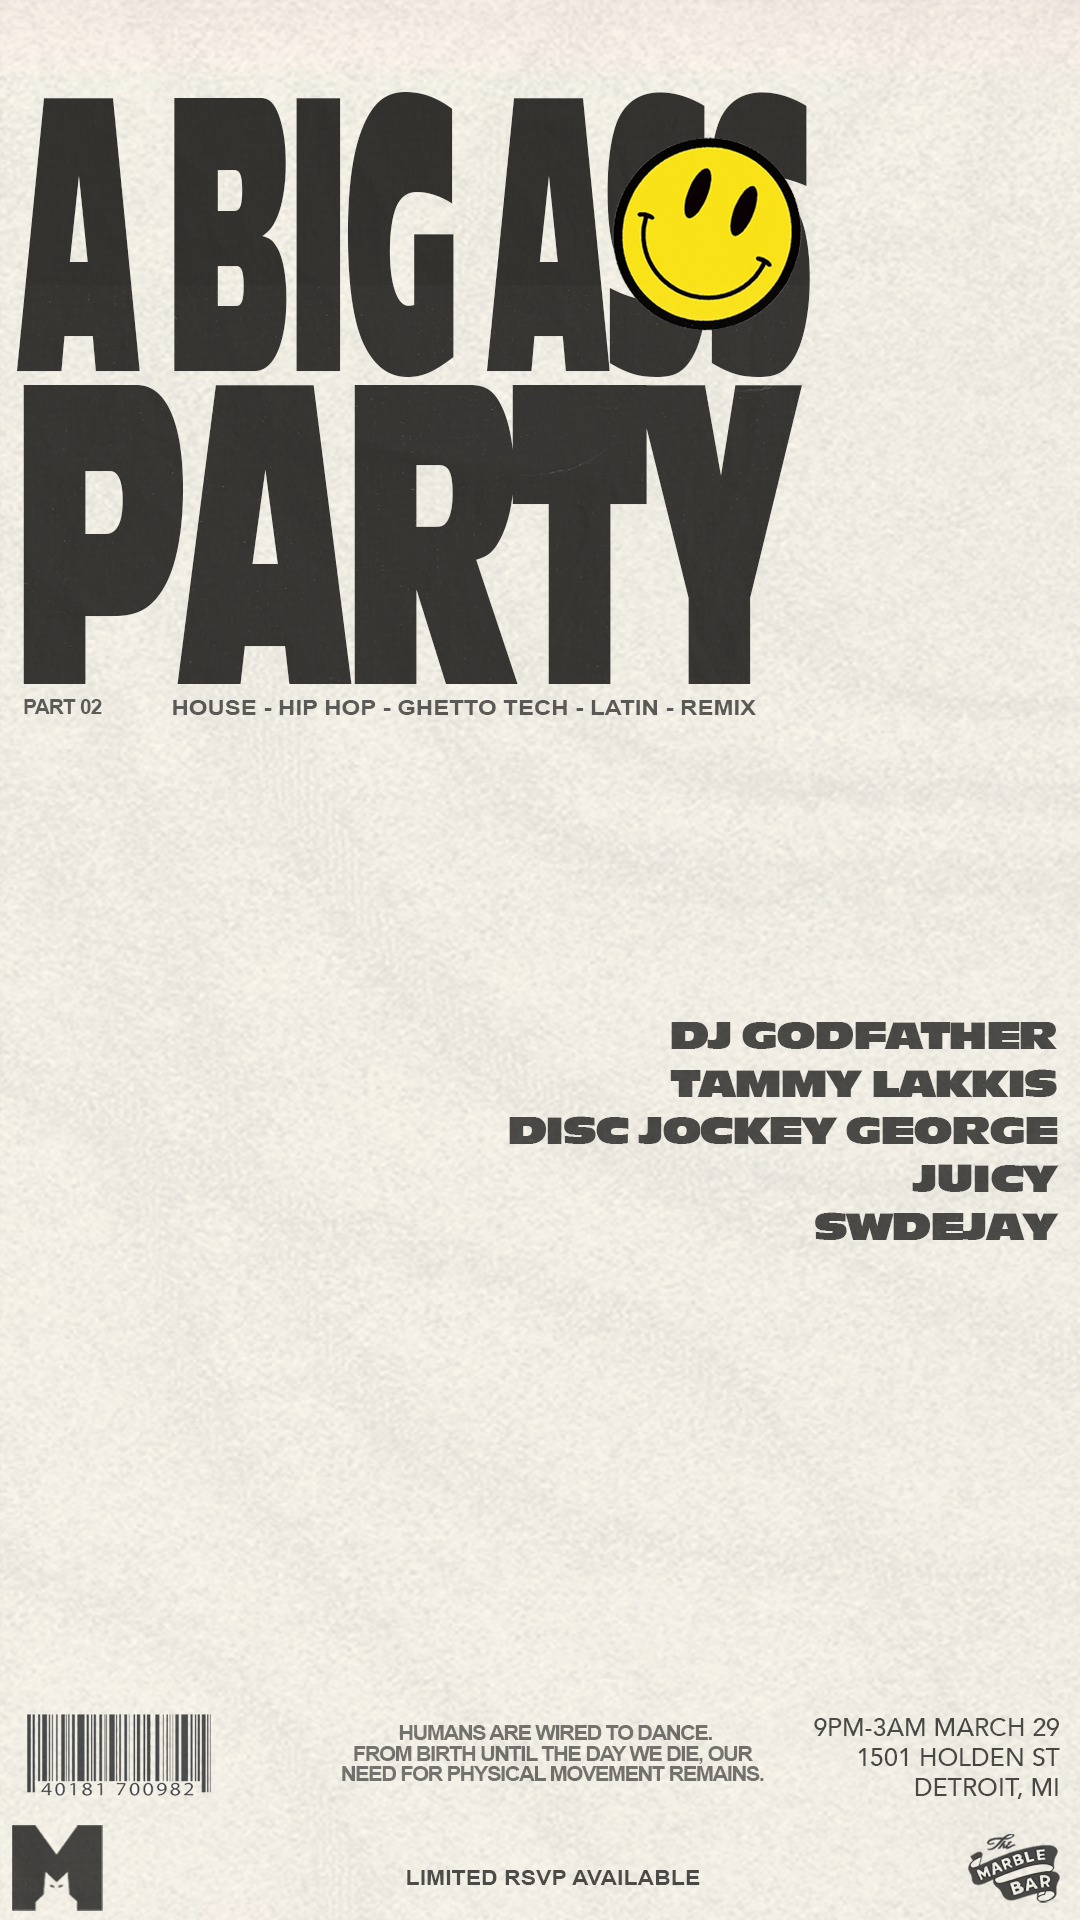 A Big A$$ Party with DJ Godfather, Tammy Lakkis, Disc Jockey George, Juicy and SWDejay - フライヤー表